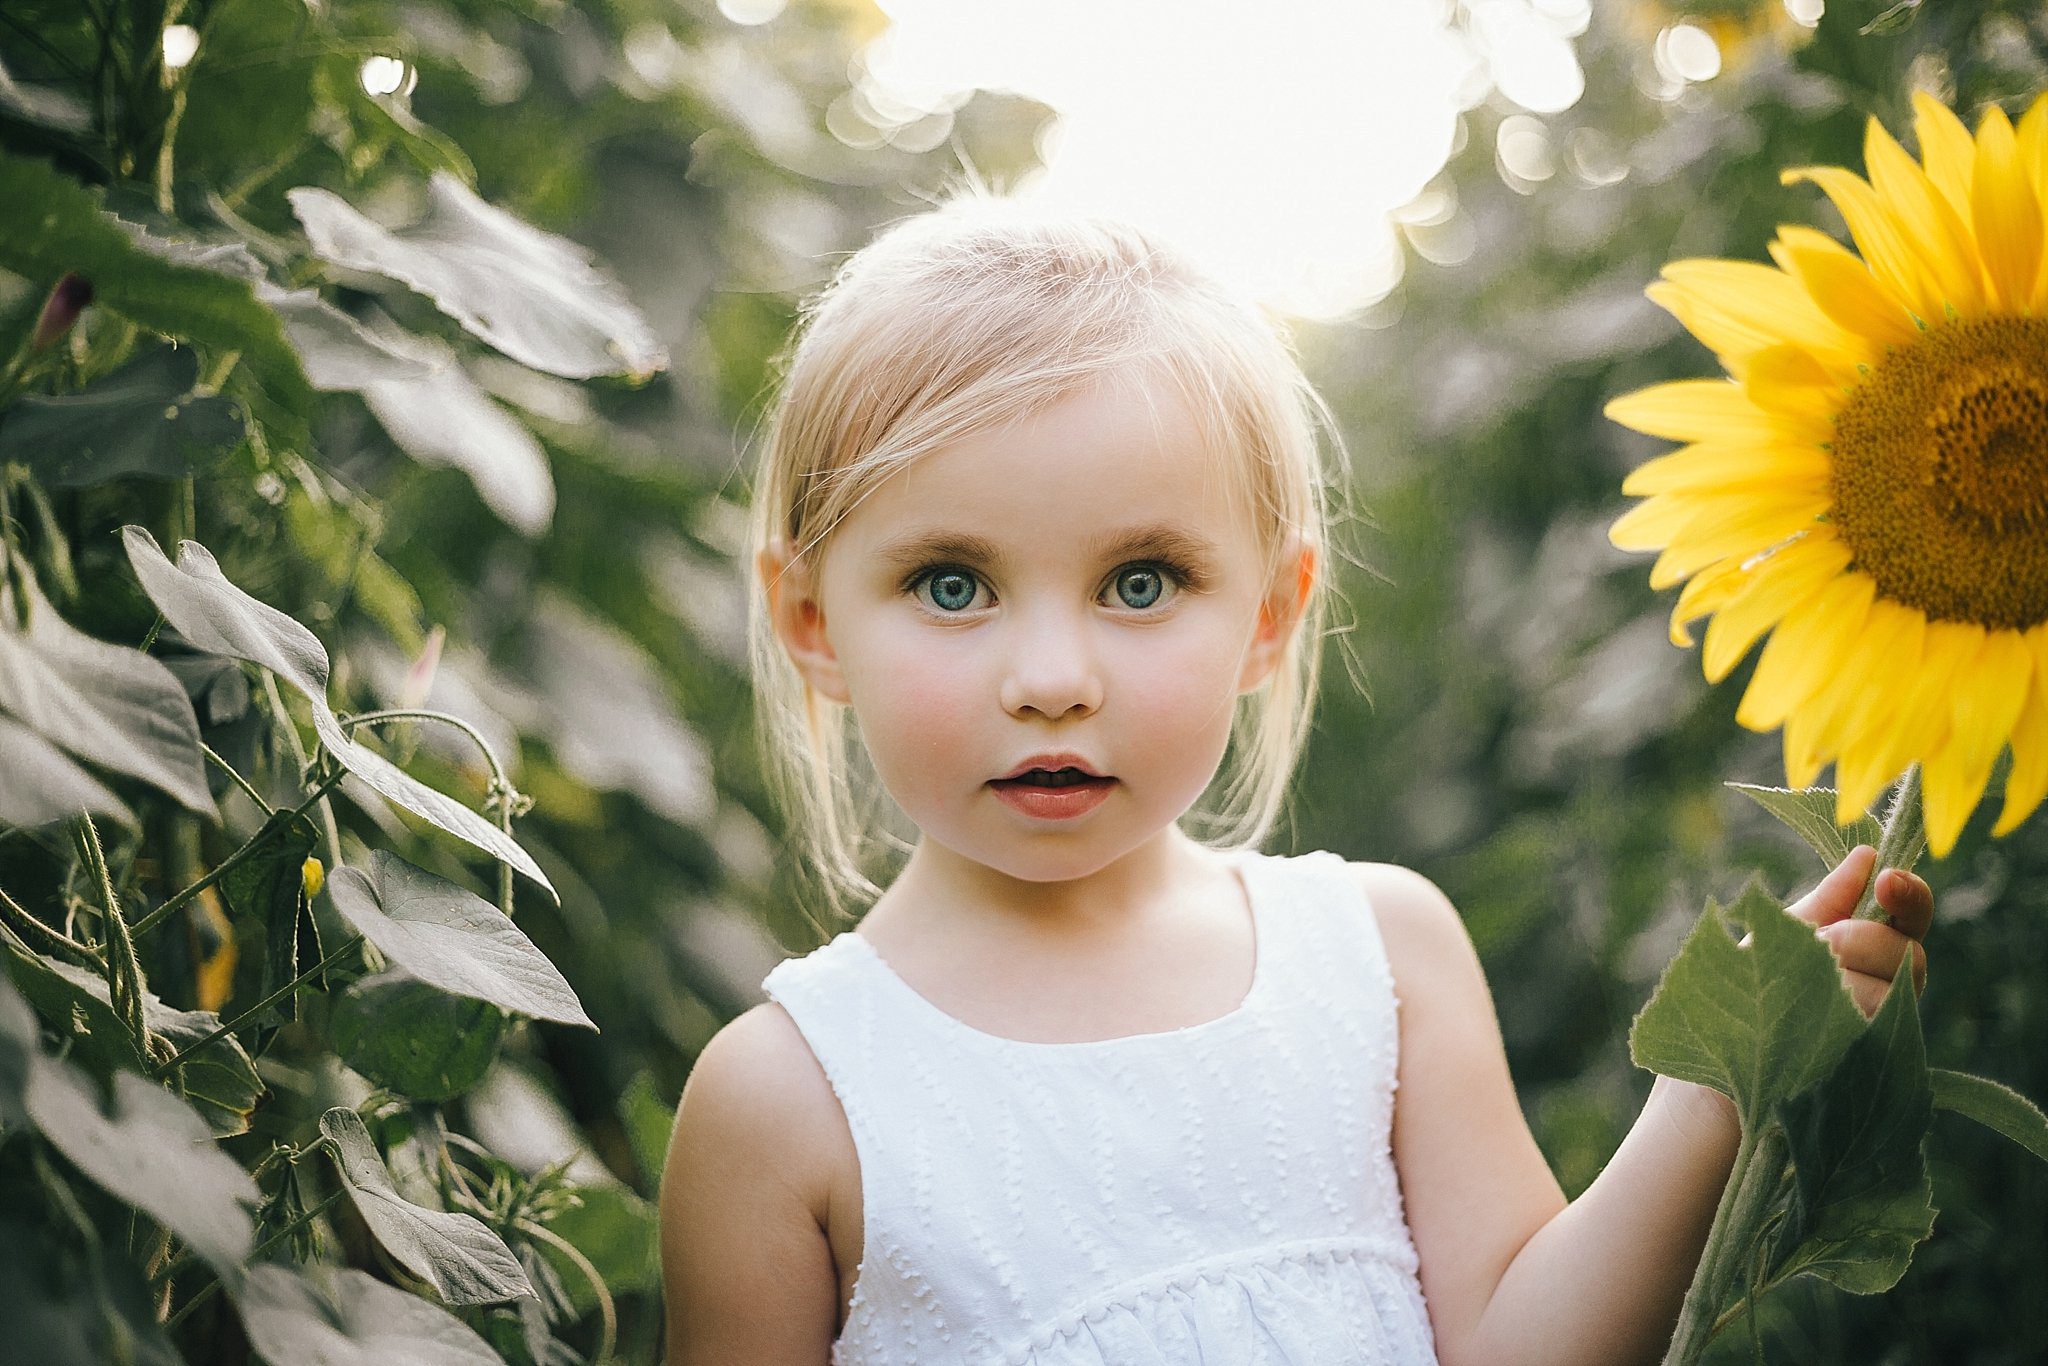 Knoxville Sunflower Fields | Erin Morrison Photography www.erinmorrisonphotography.com